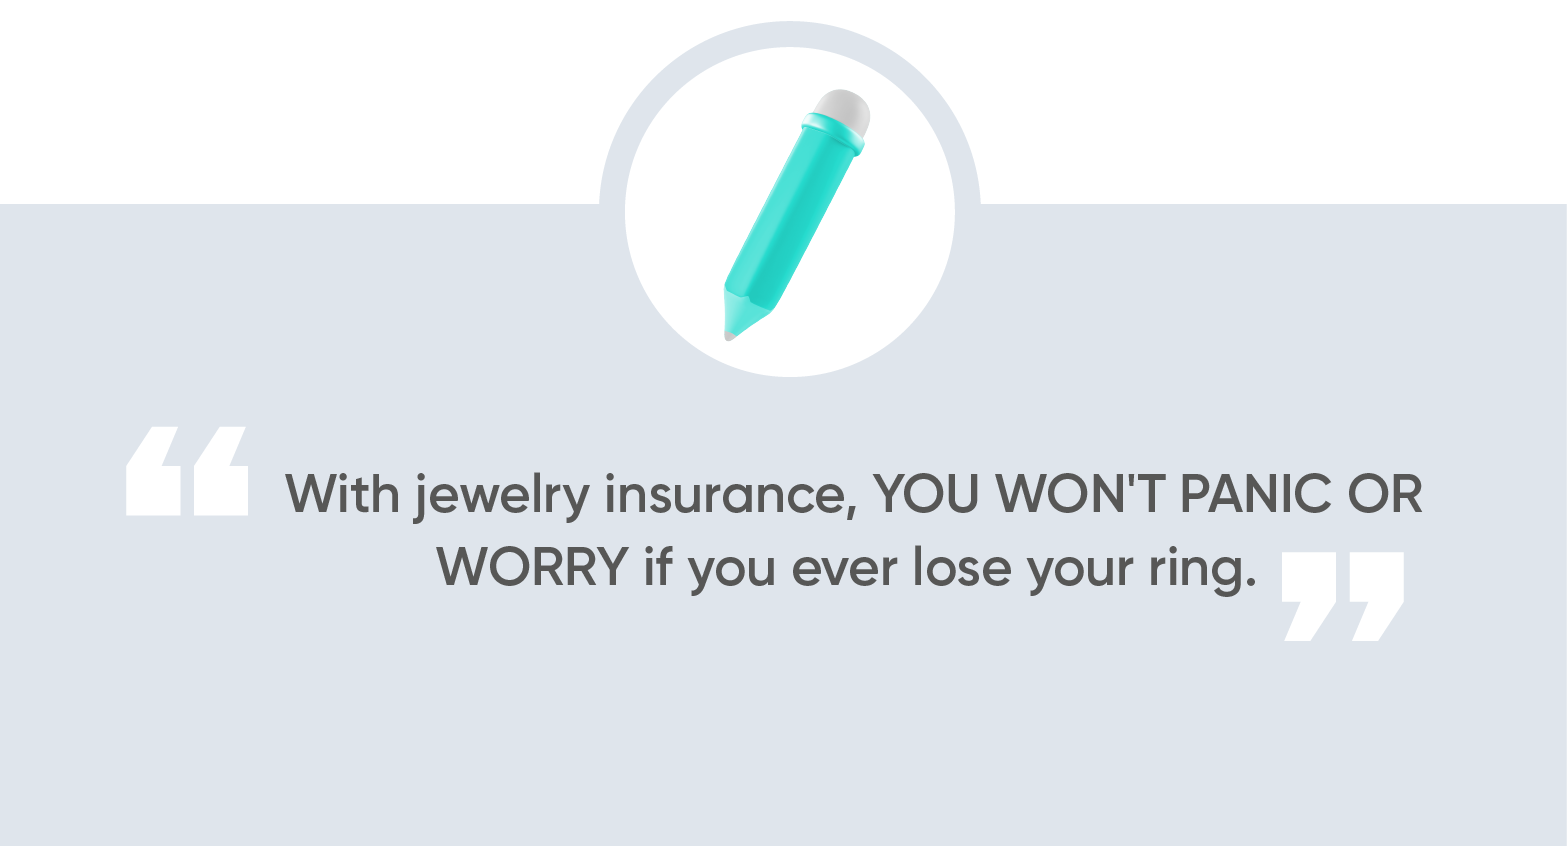 With jewelry insurance, you won't panic or worry if you ever lose your ring. 